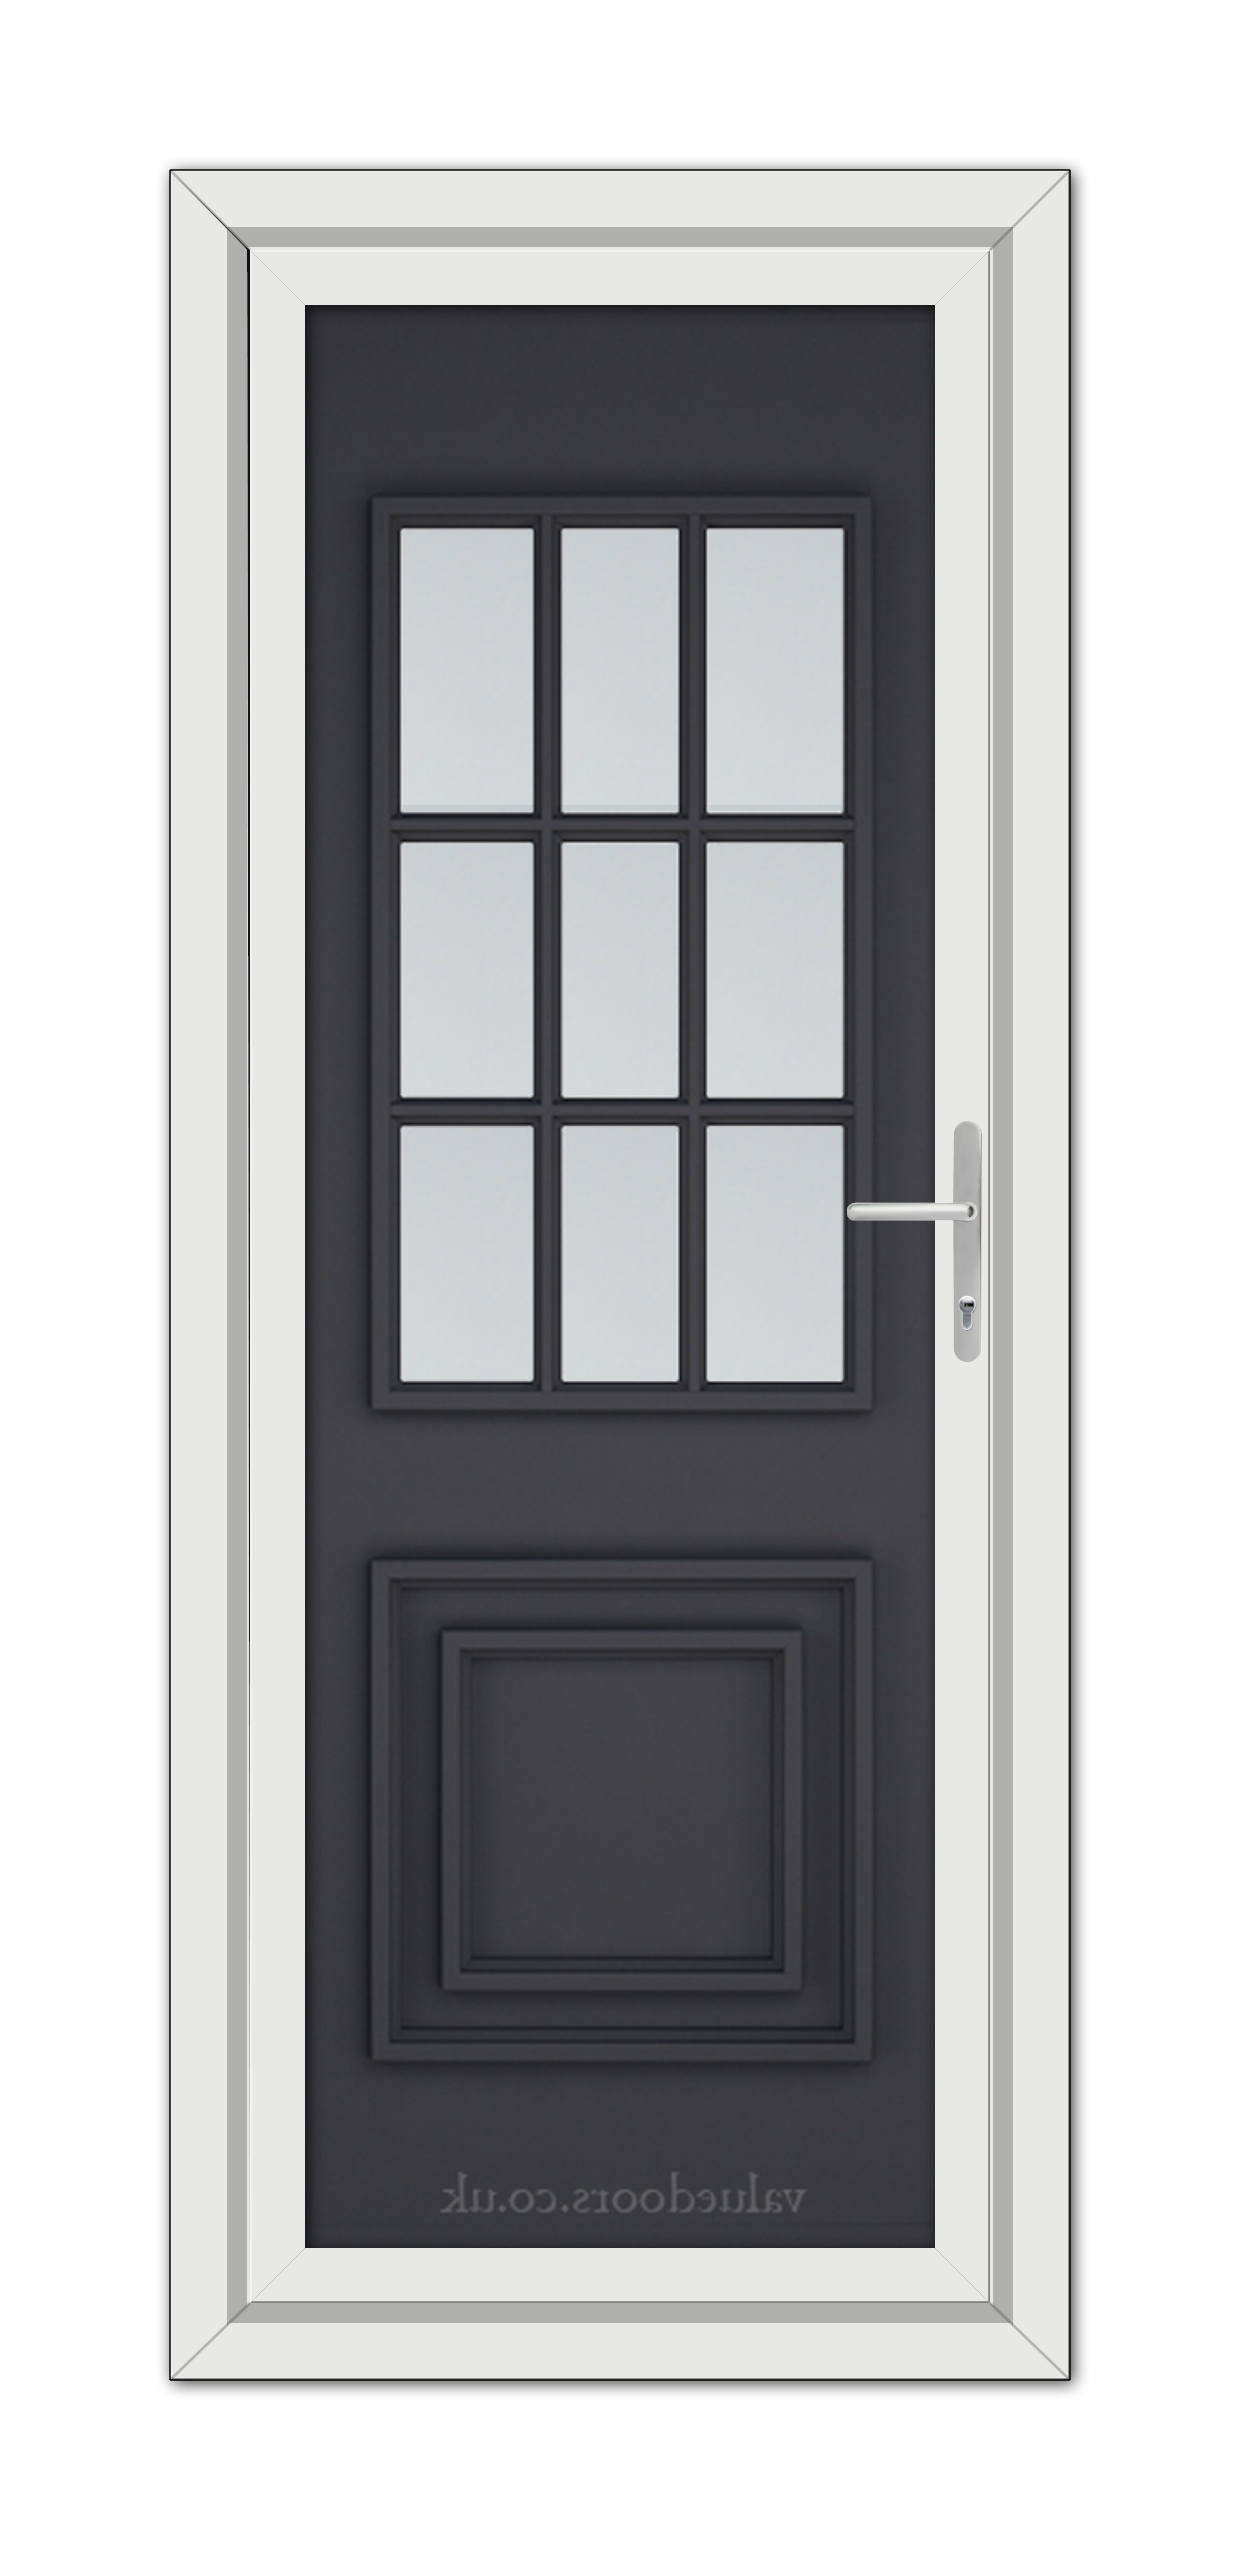 A modern Grey Cambridge One uPVC door with nine square glass panels, a raised central panel, and a silver handle, set within a white frame.